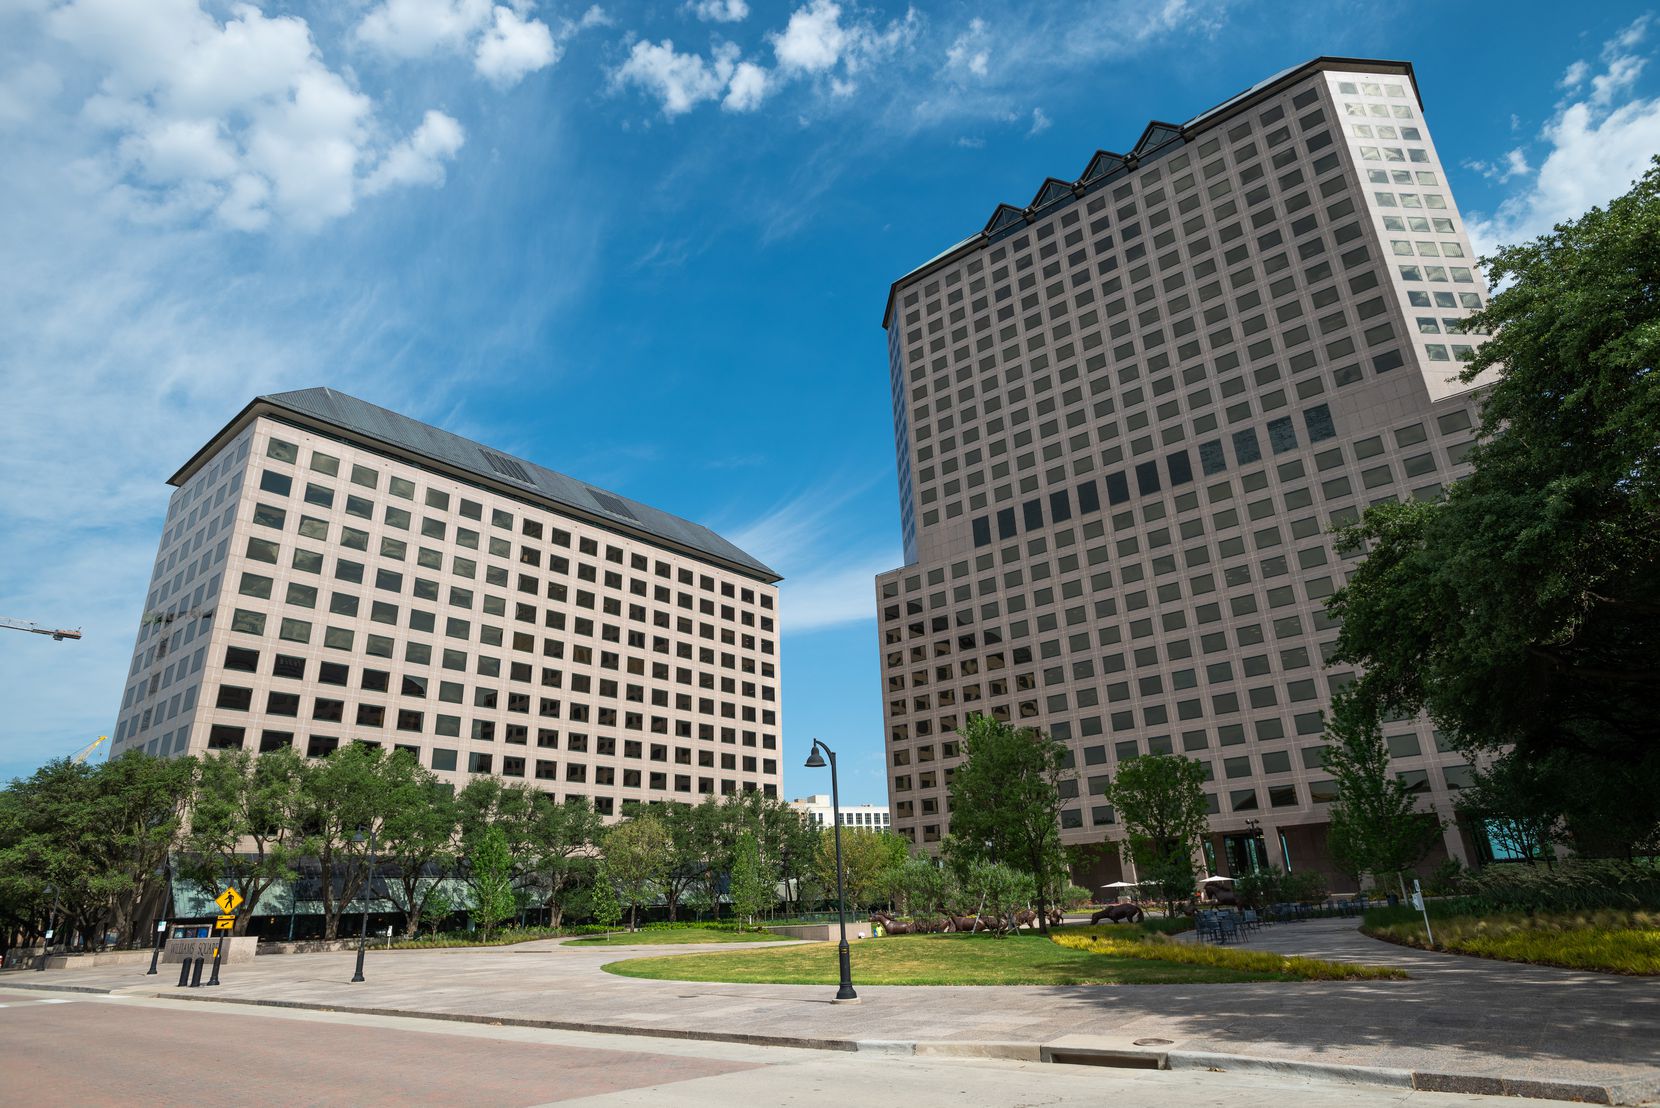 Caterpillar Corporation offices, left, are in Williams Square in Irving.